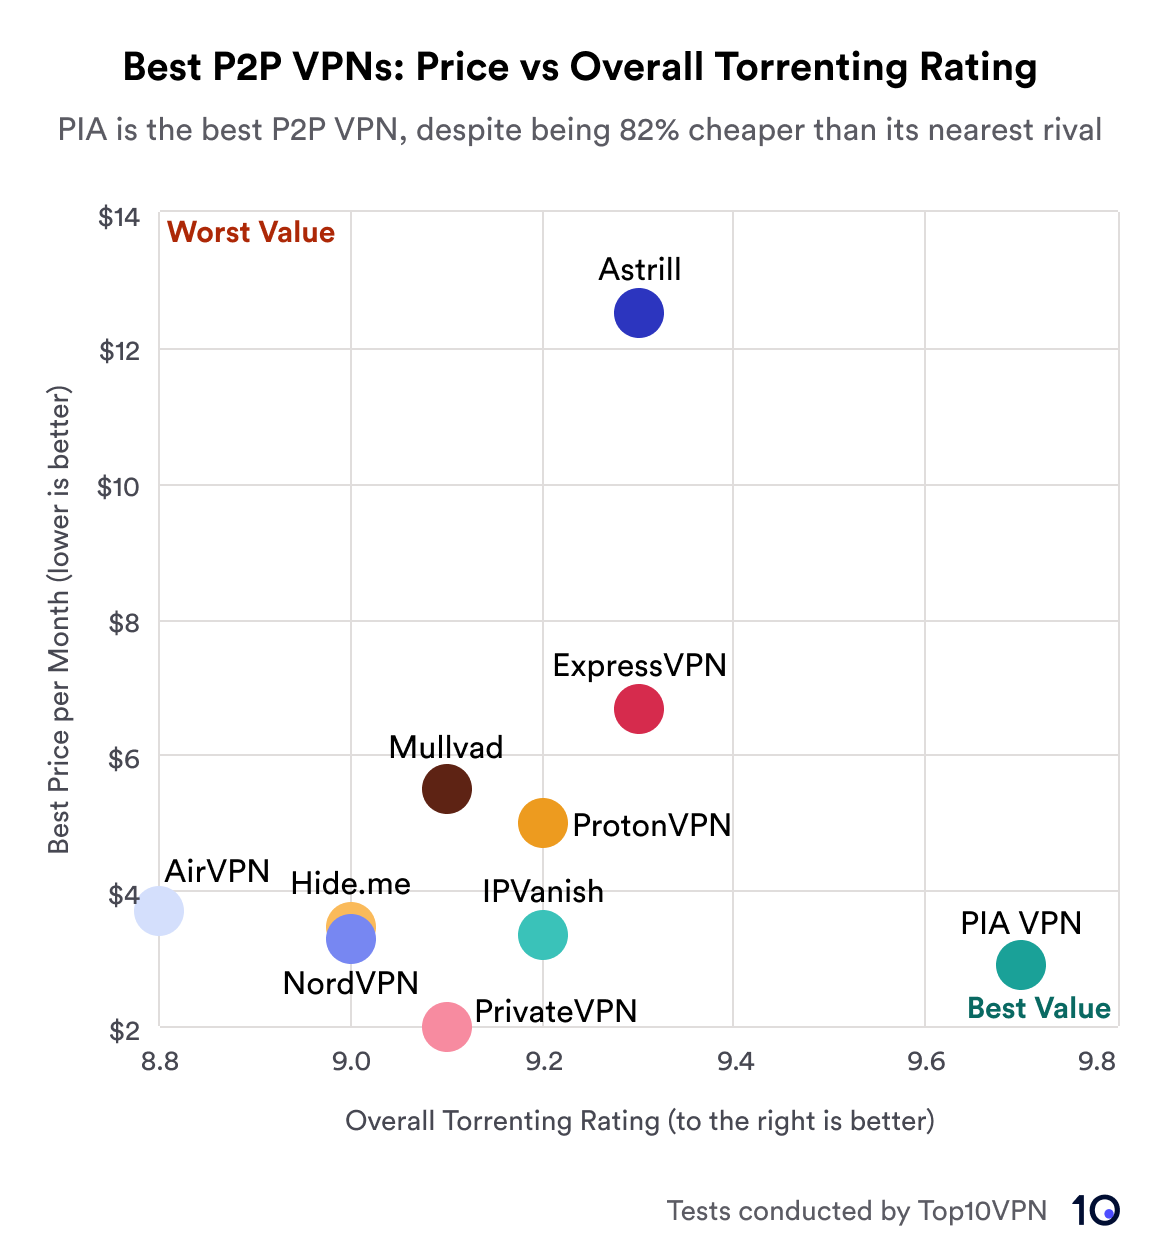 Scatter plot comparing the best torrenting VPNs by price and performance